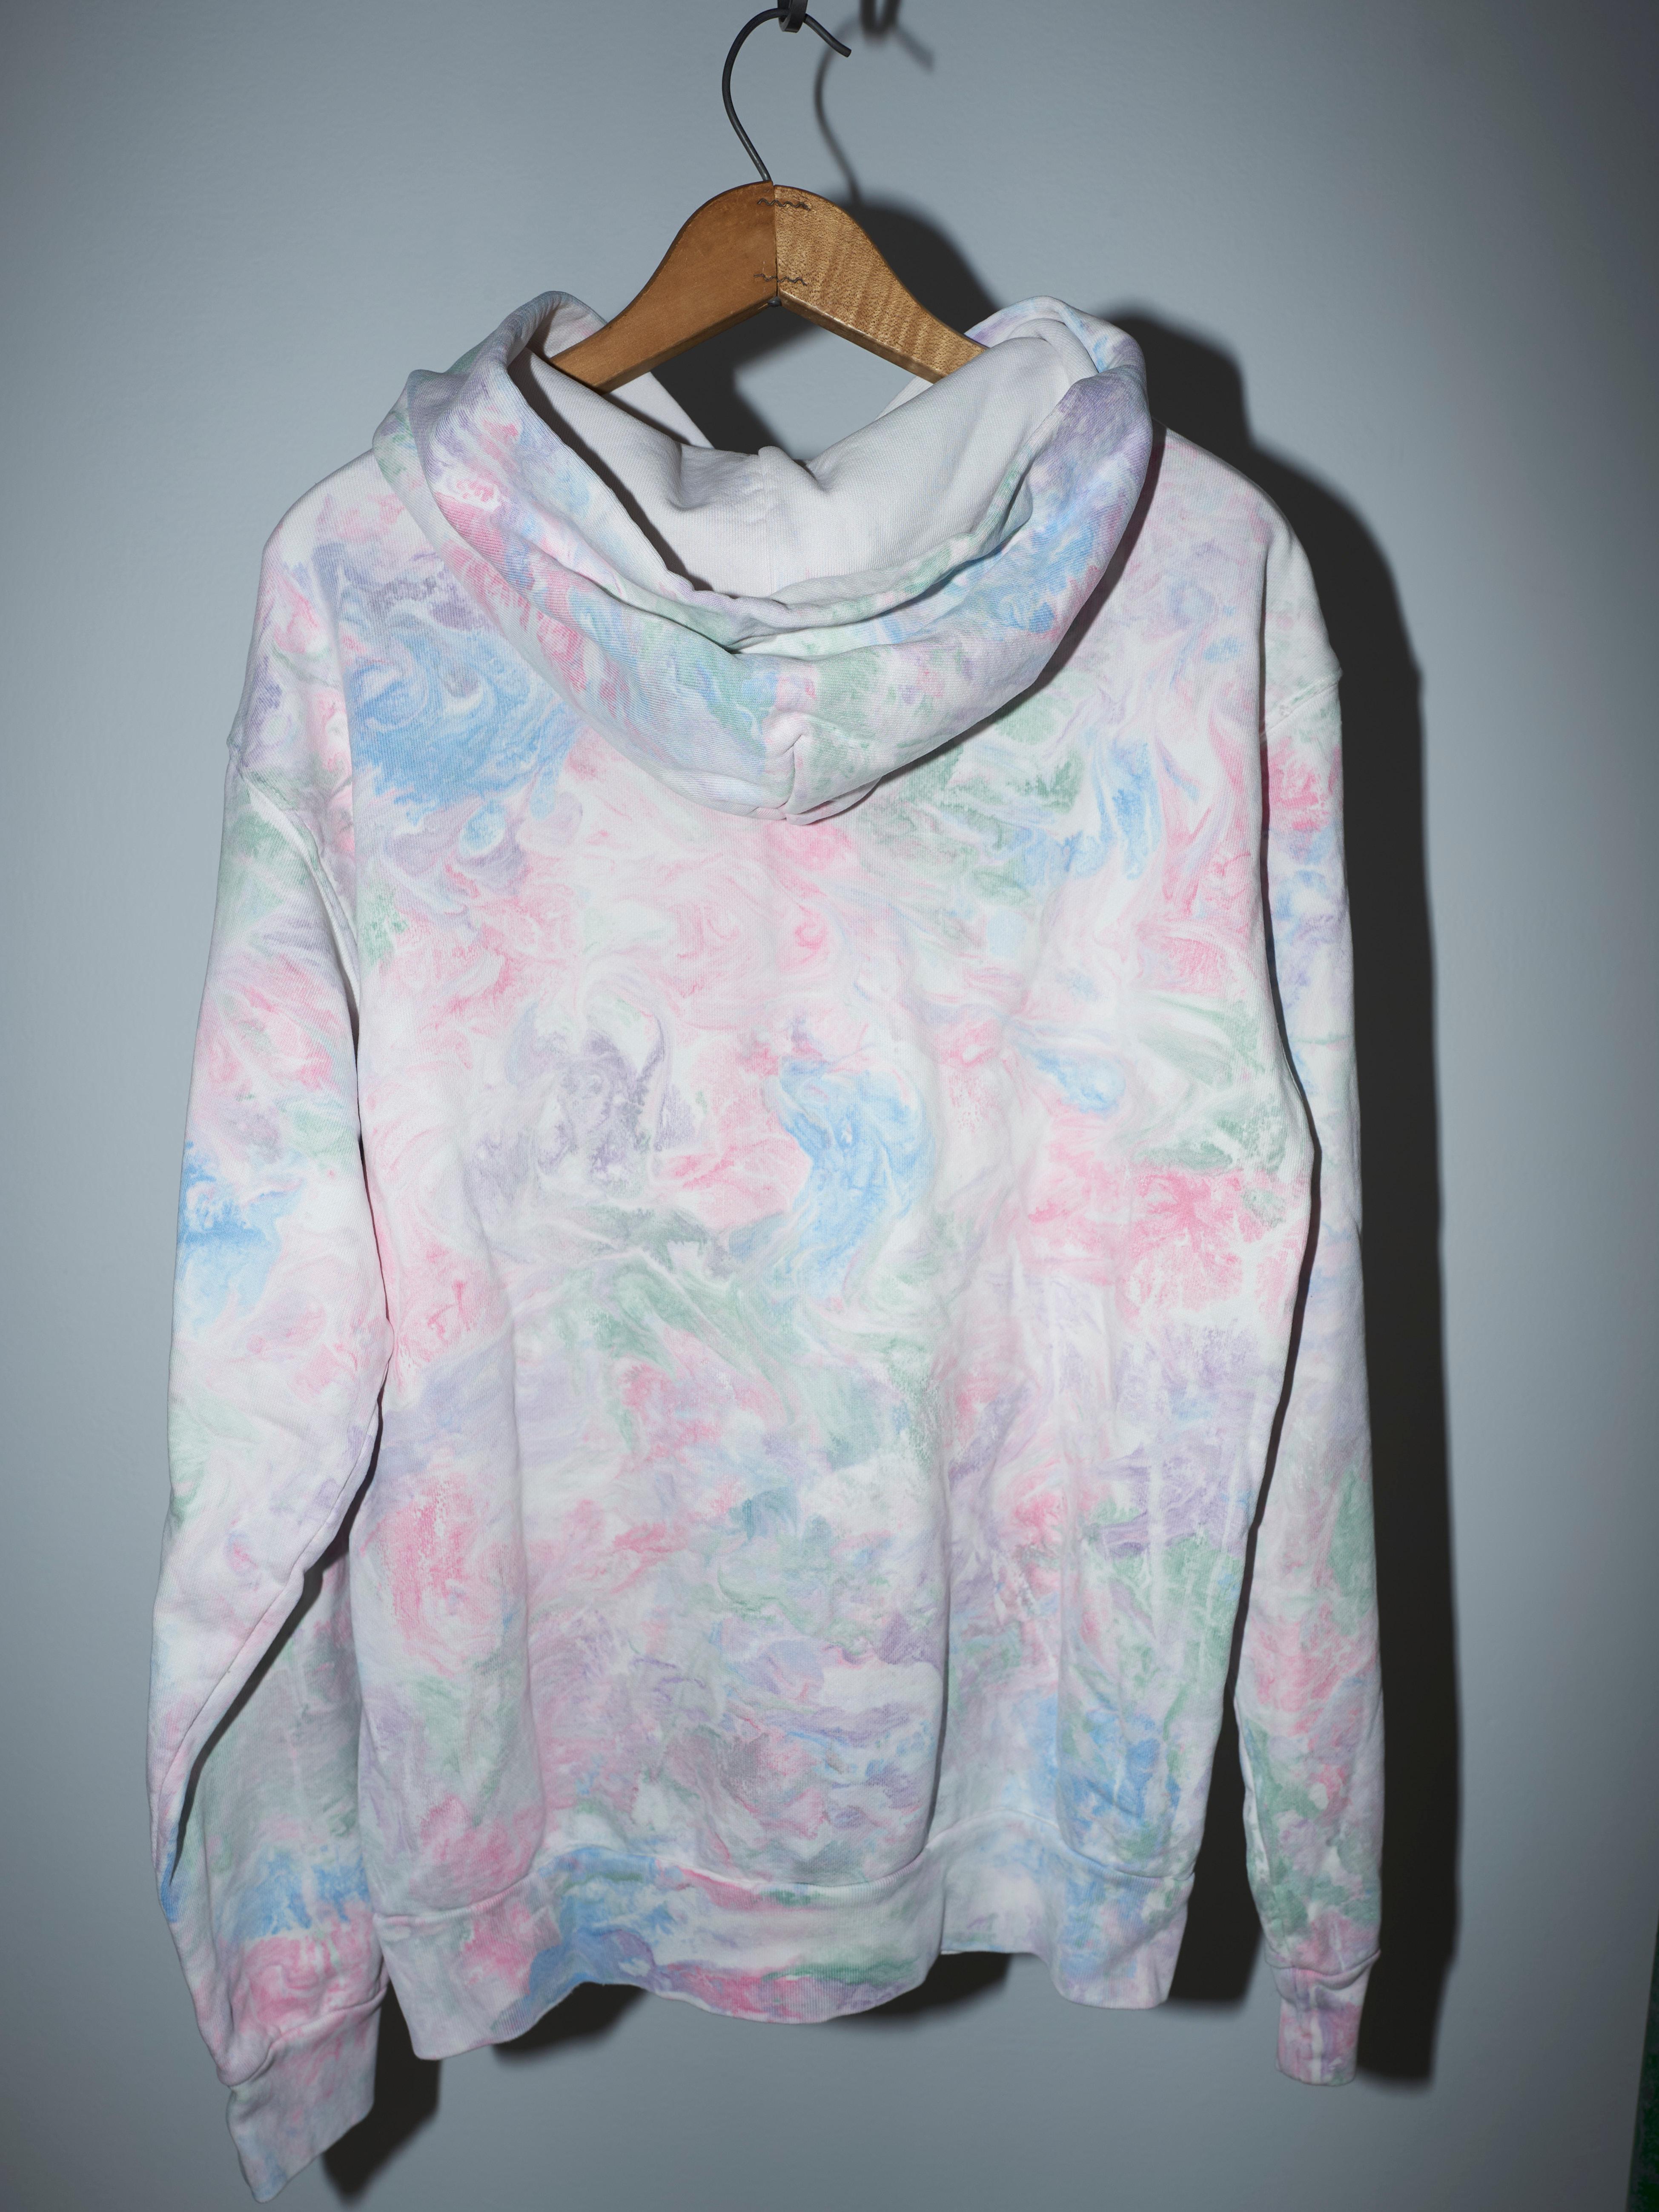 Hoodie Pastel Marble Cotton Embellished Chain Patchwork J Dauphin For Sale 9